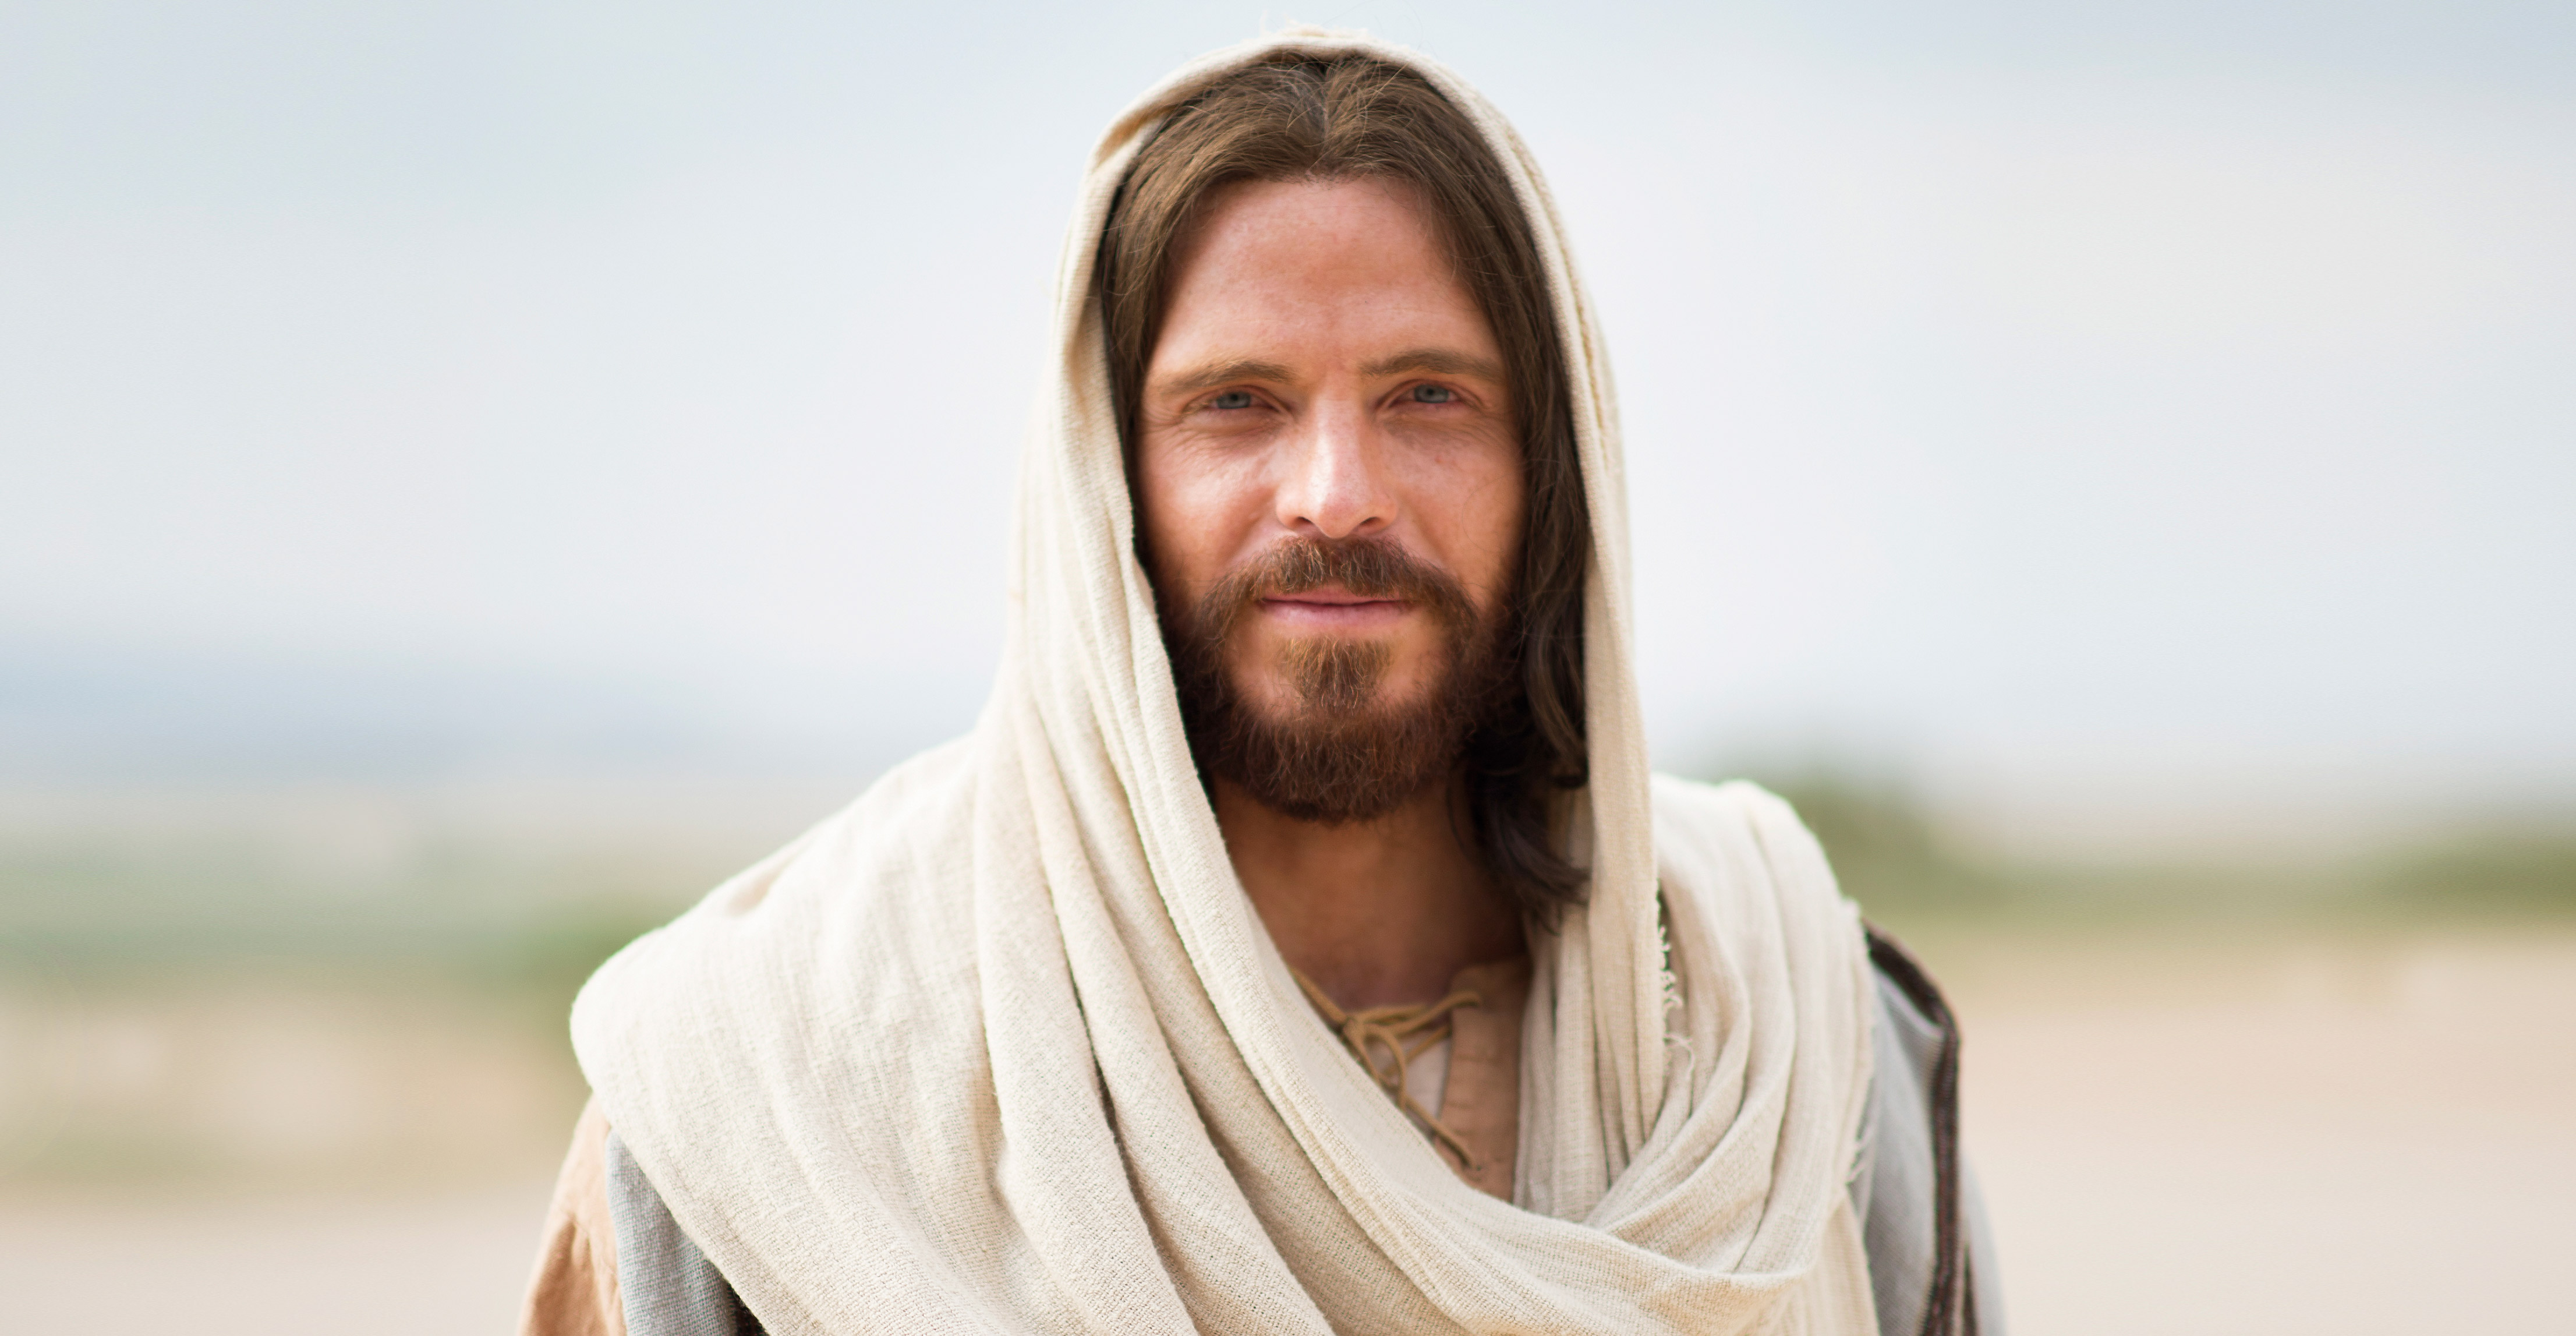 Why Is Jesus Christ Important in My Life?